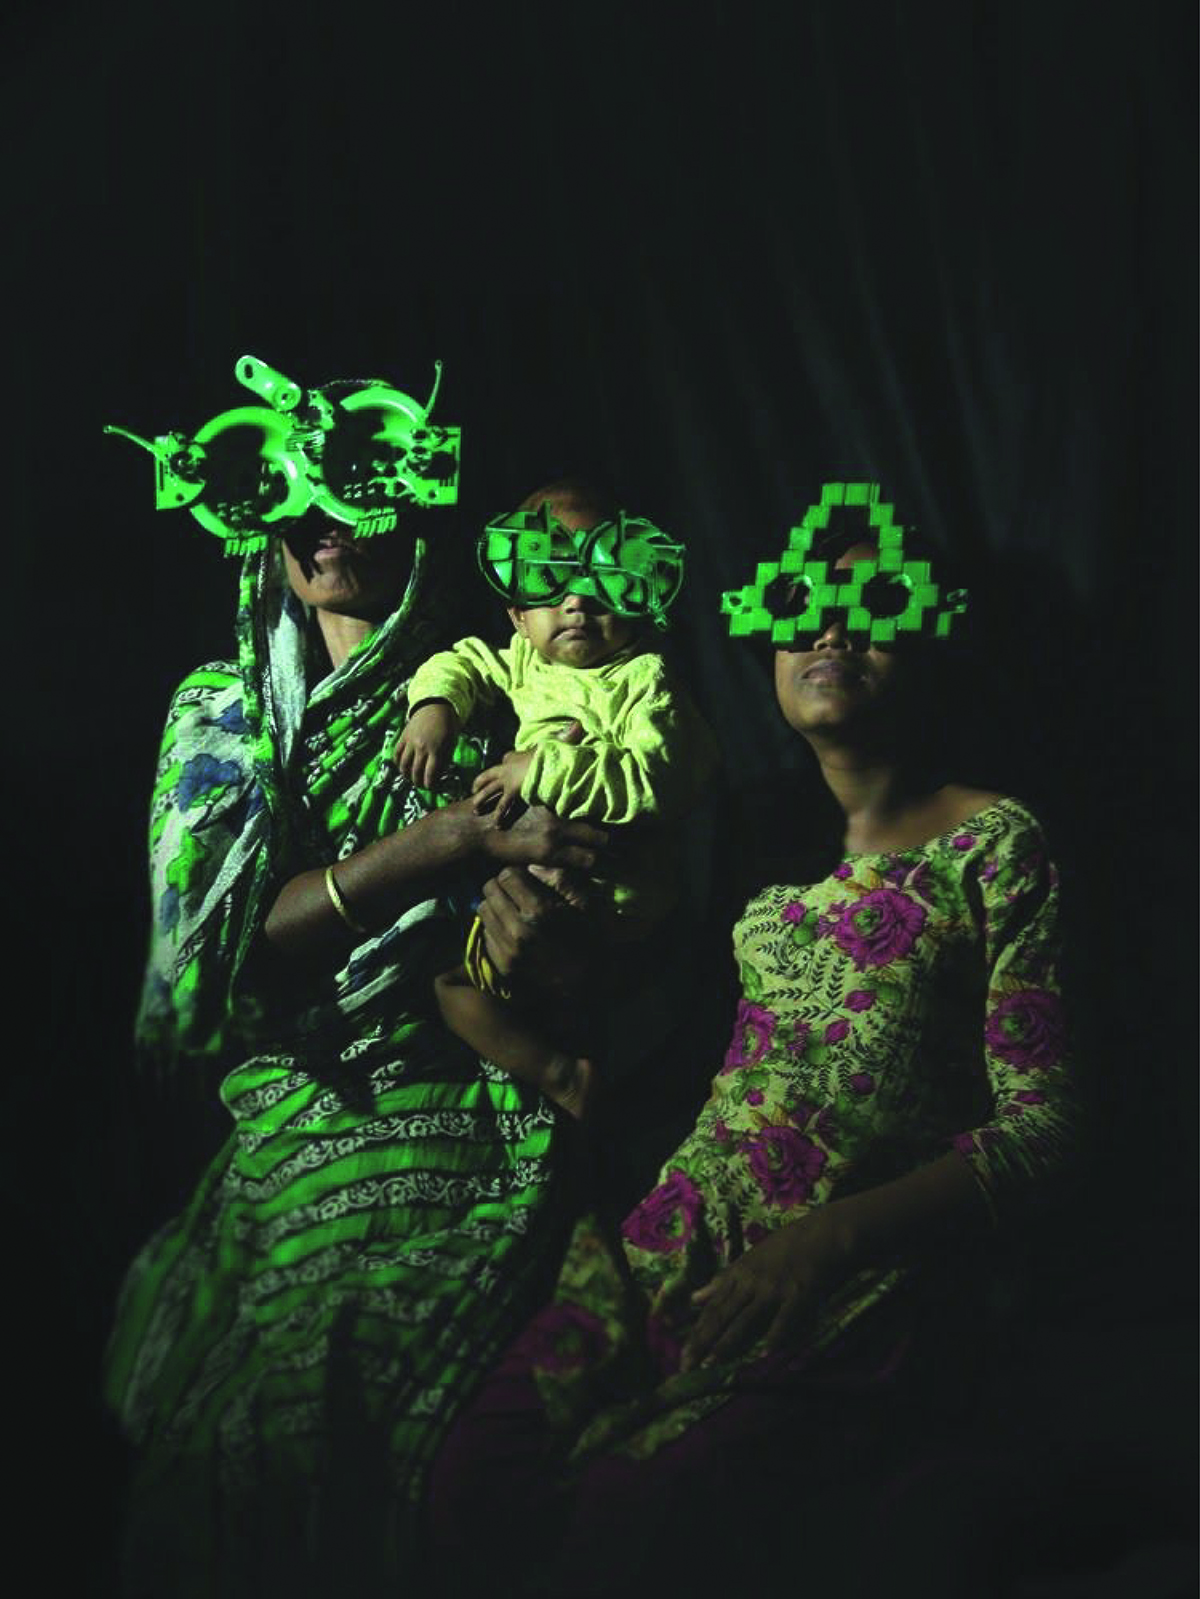 Two women, one holding a child in a dark room wearing large green glasses